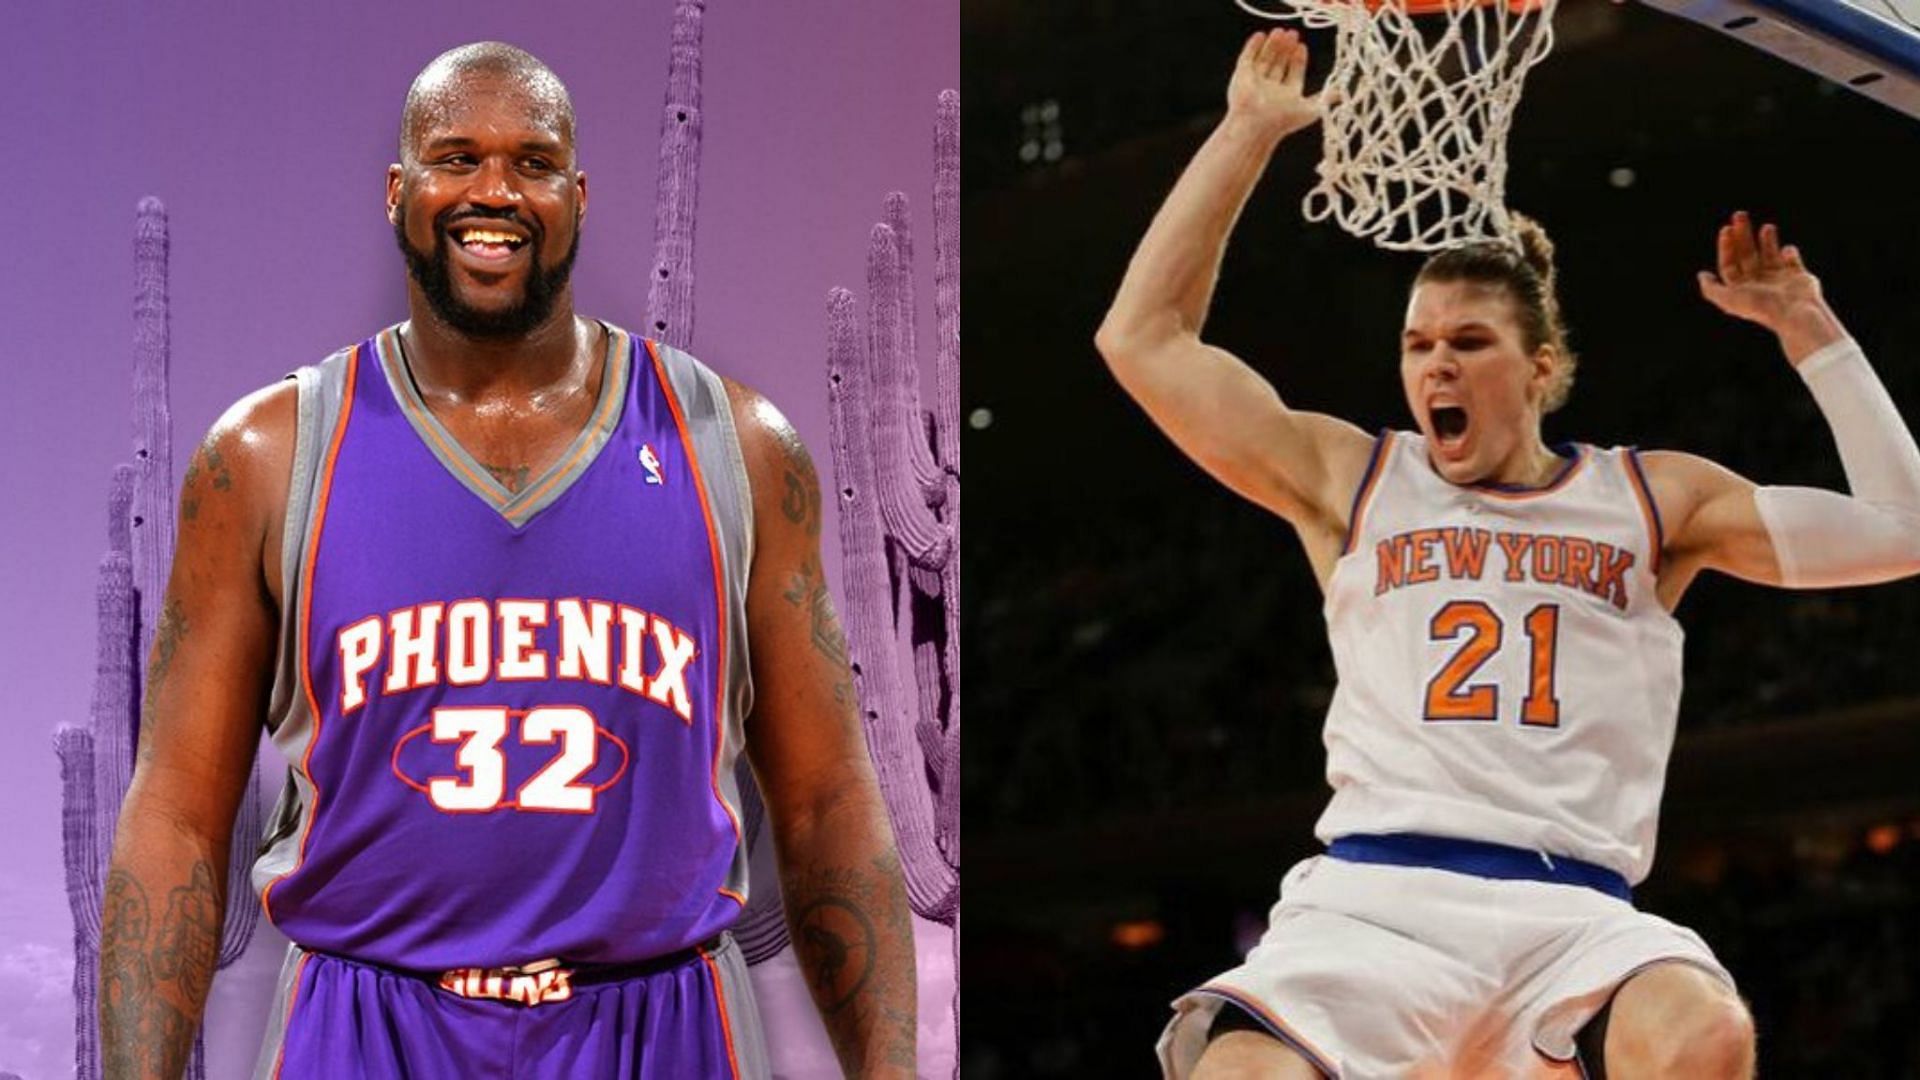 Shaquille O&rsquo;Neal once pulled a nasty prank on Lou Amundson